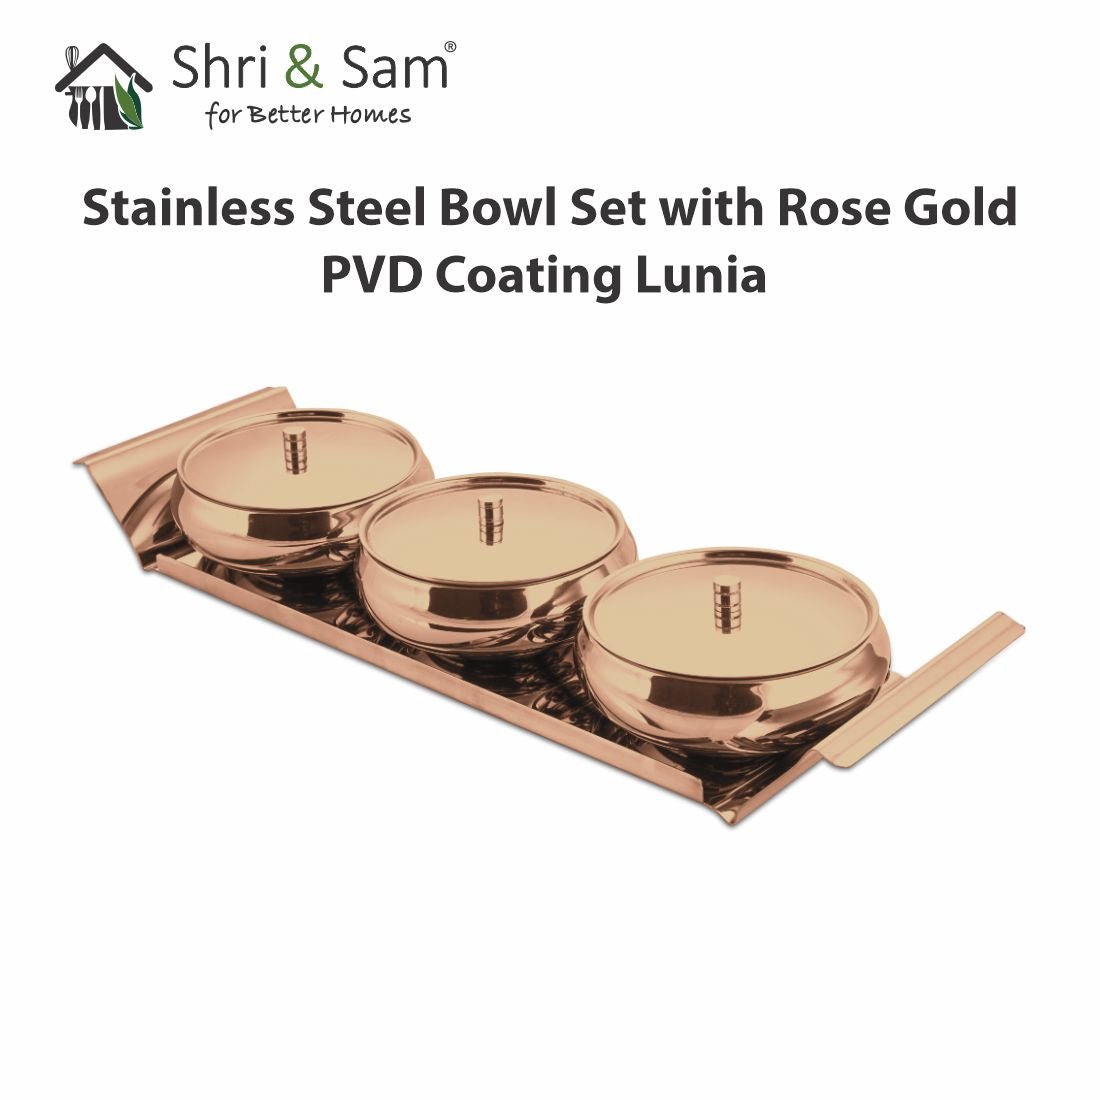 Stainless Steel Bowl Set with Rose Gold PVD Coating Lunia